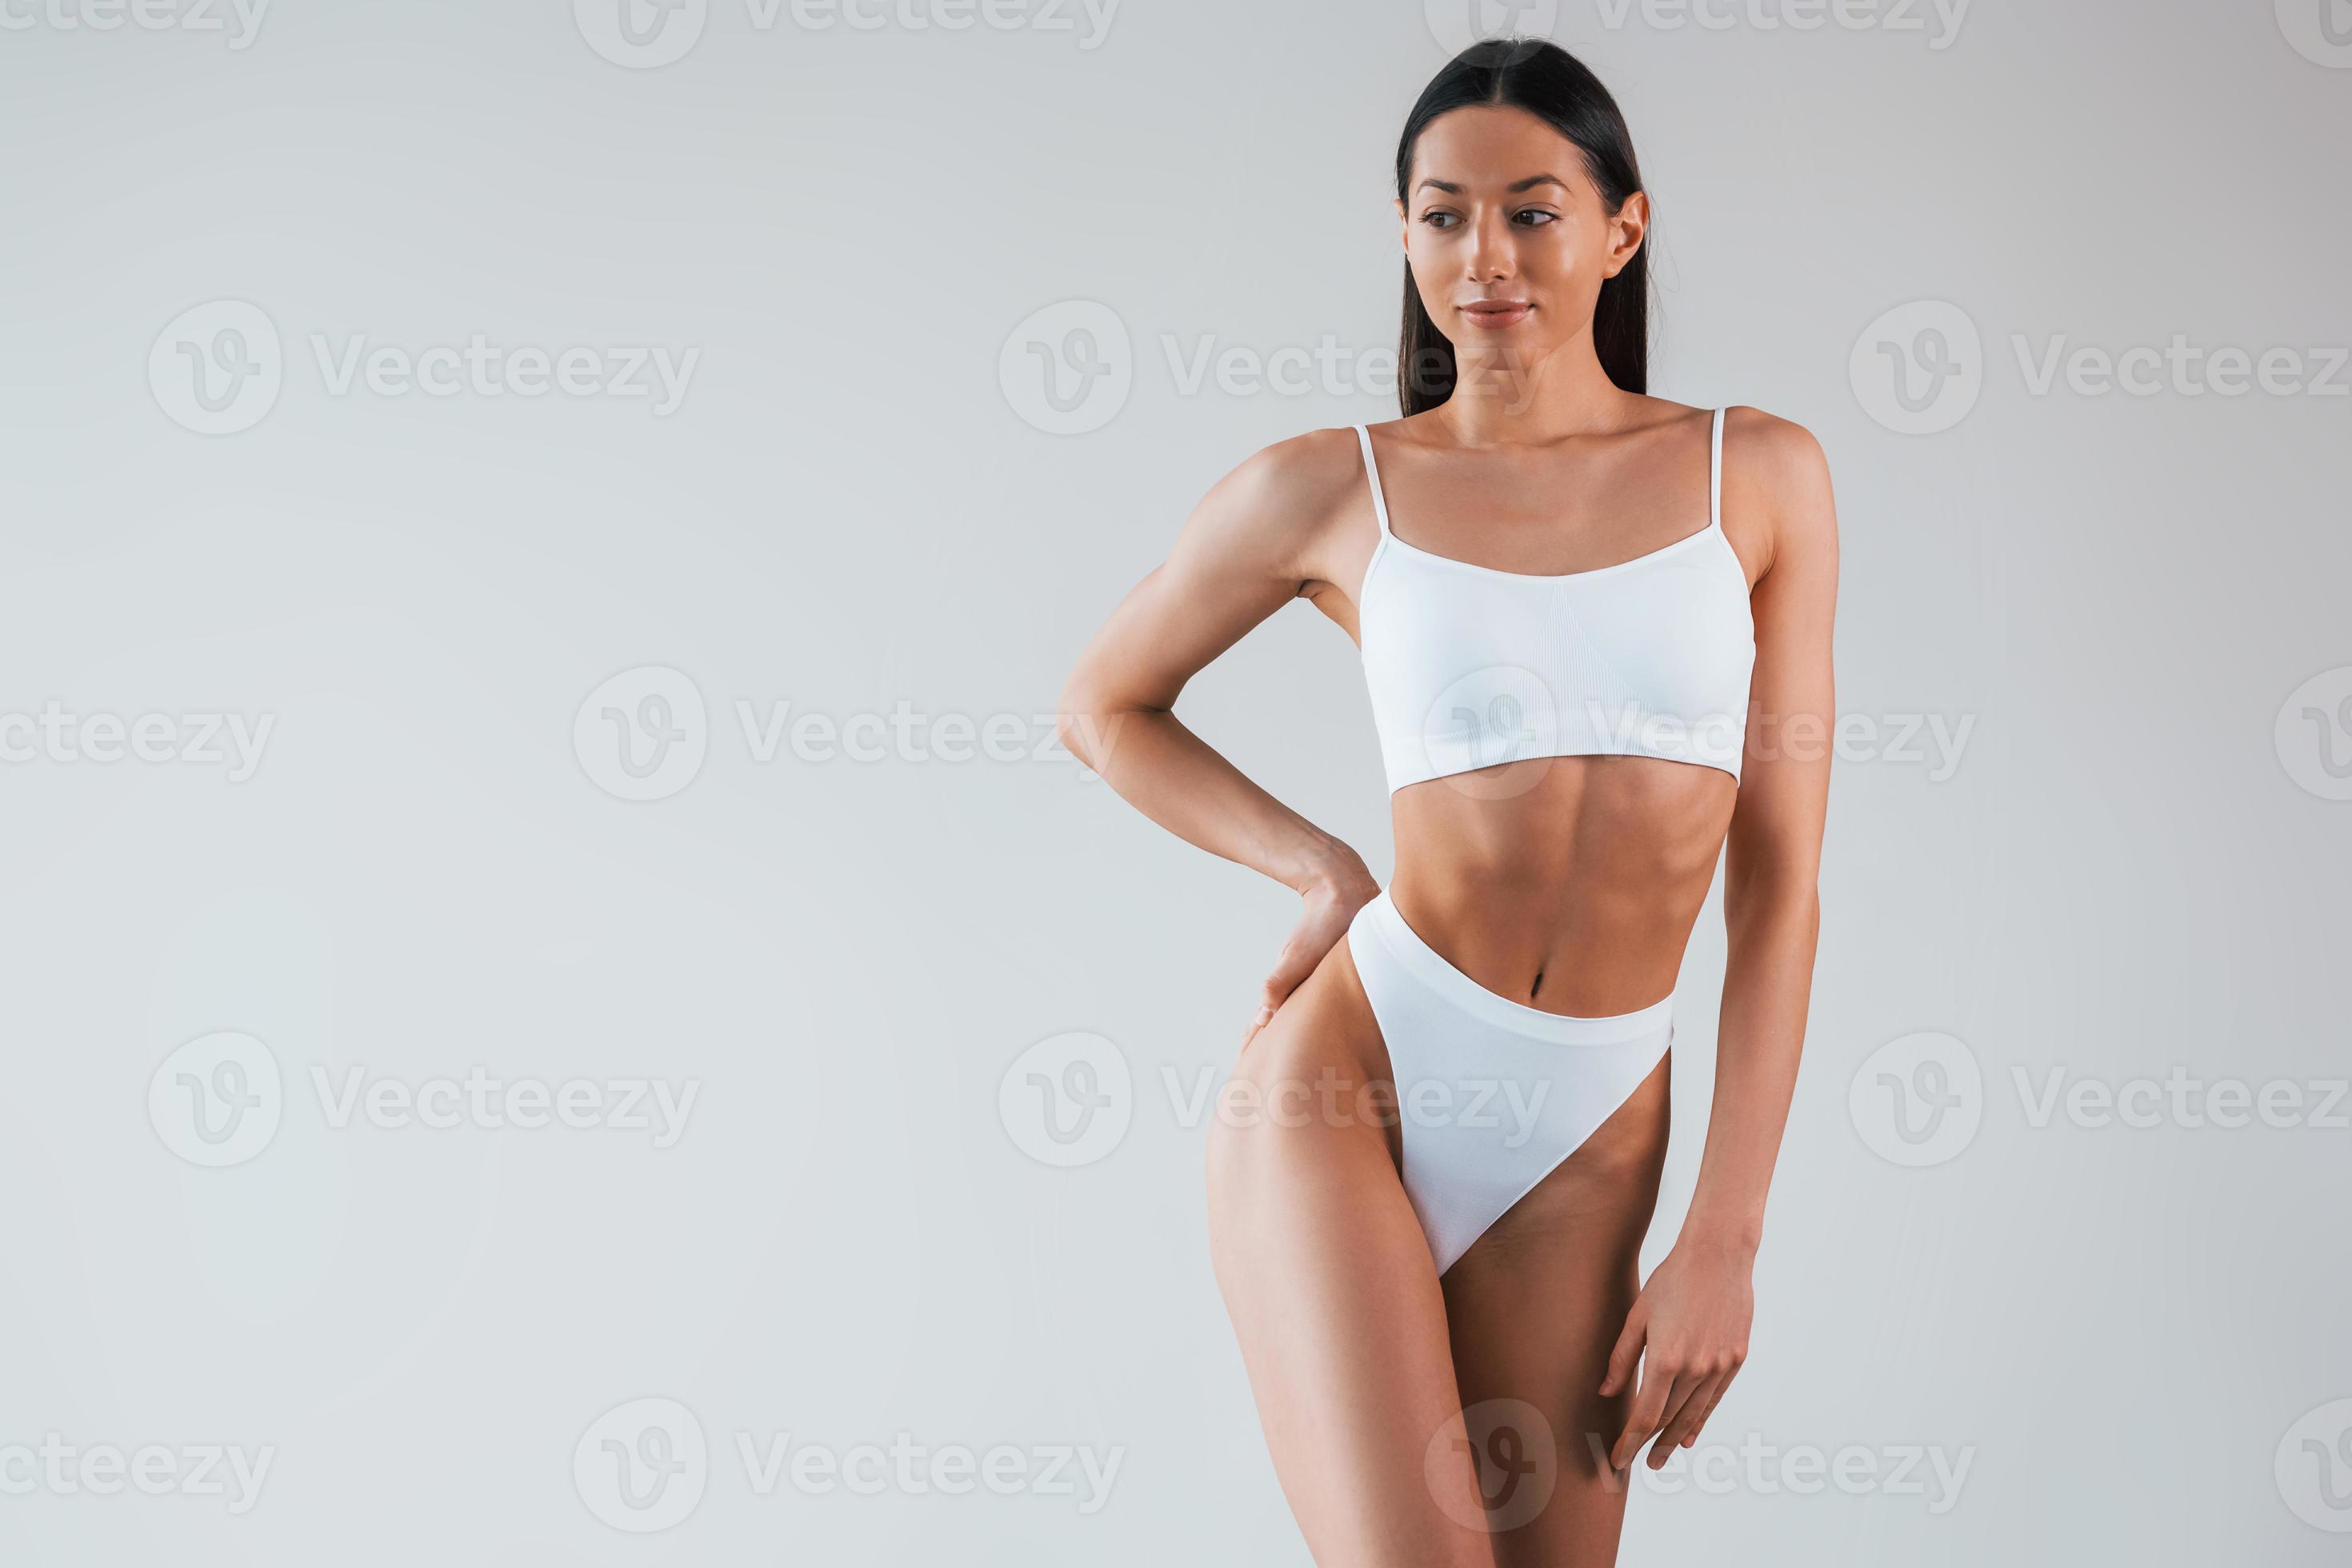 In white underwear. Woman with sportive slim body type that is in